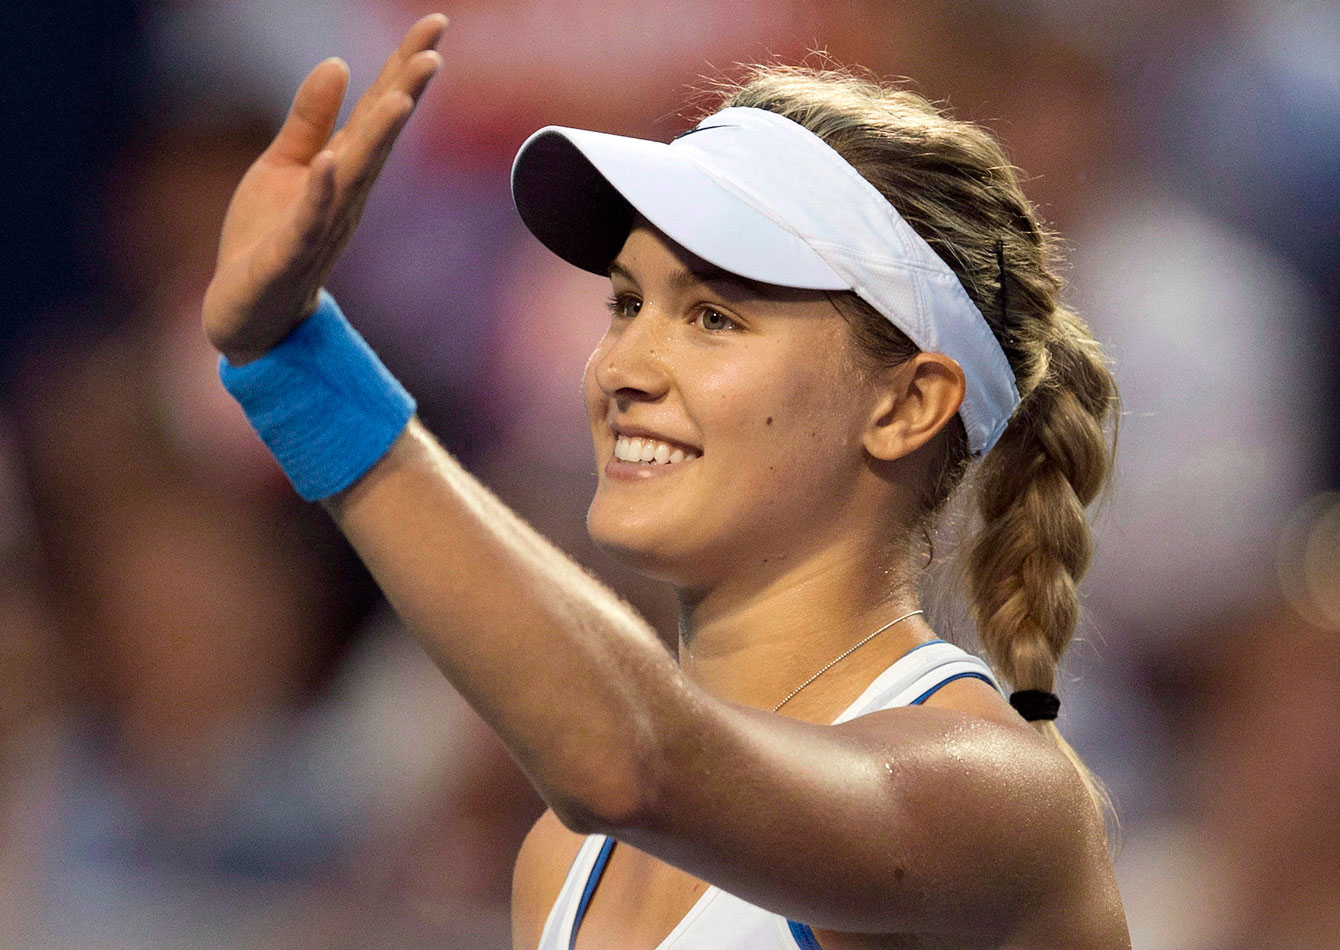 Eugenie Bouchard ended 2013 winning WTA Newcomer of the Year. 